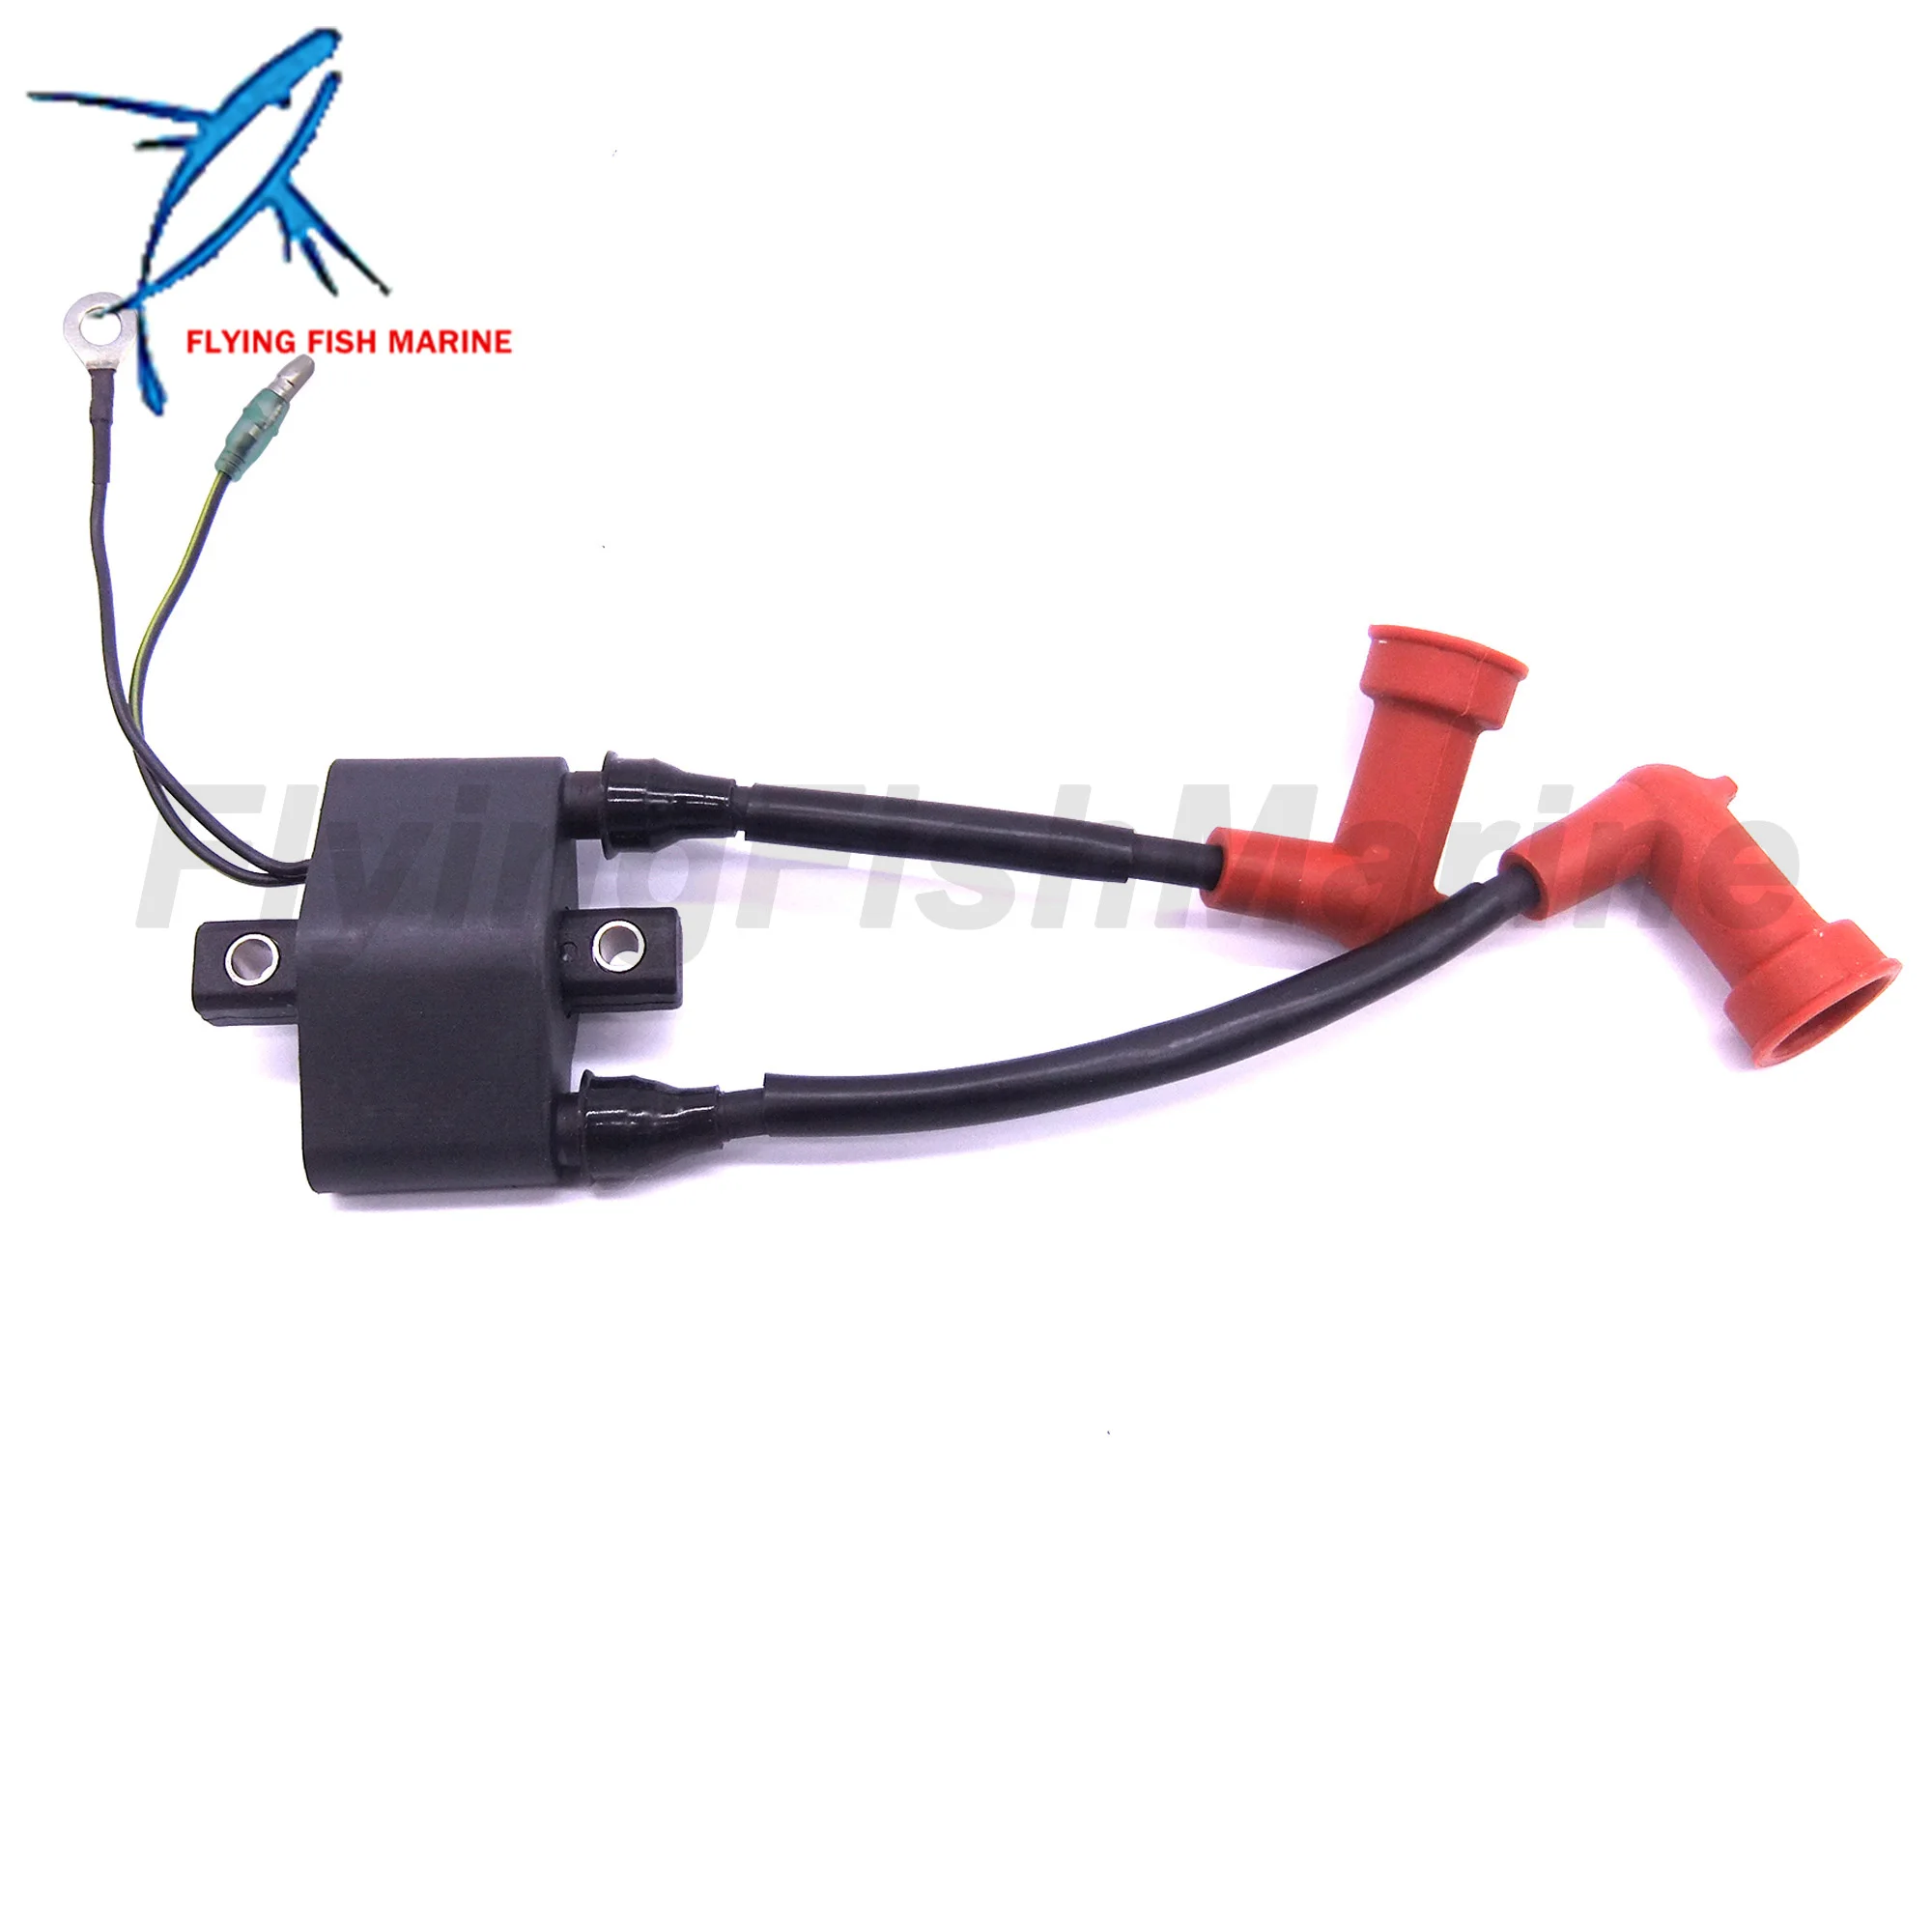 

Outboard Engine 3G2-06040-2 3M3-06048-2 3G2060402 3M3060482 3G2060402M 3M3060482M Ignition coil Assy for Tohatsu Nissan Boat Mot